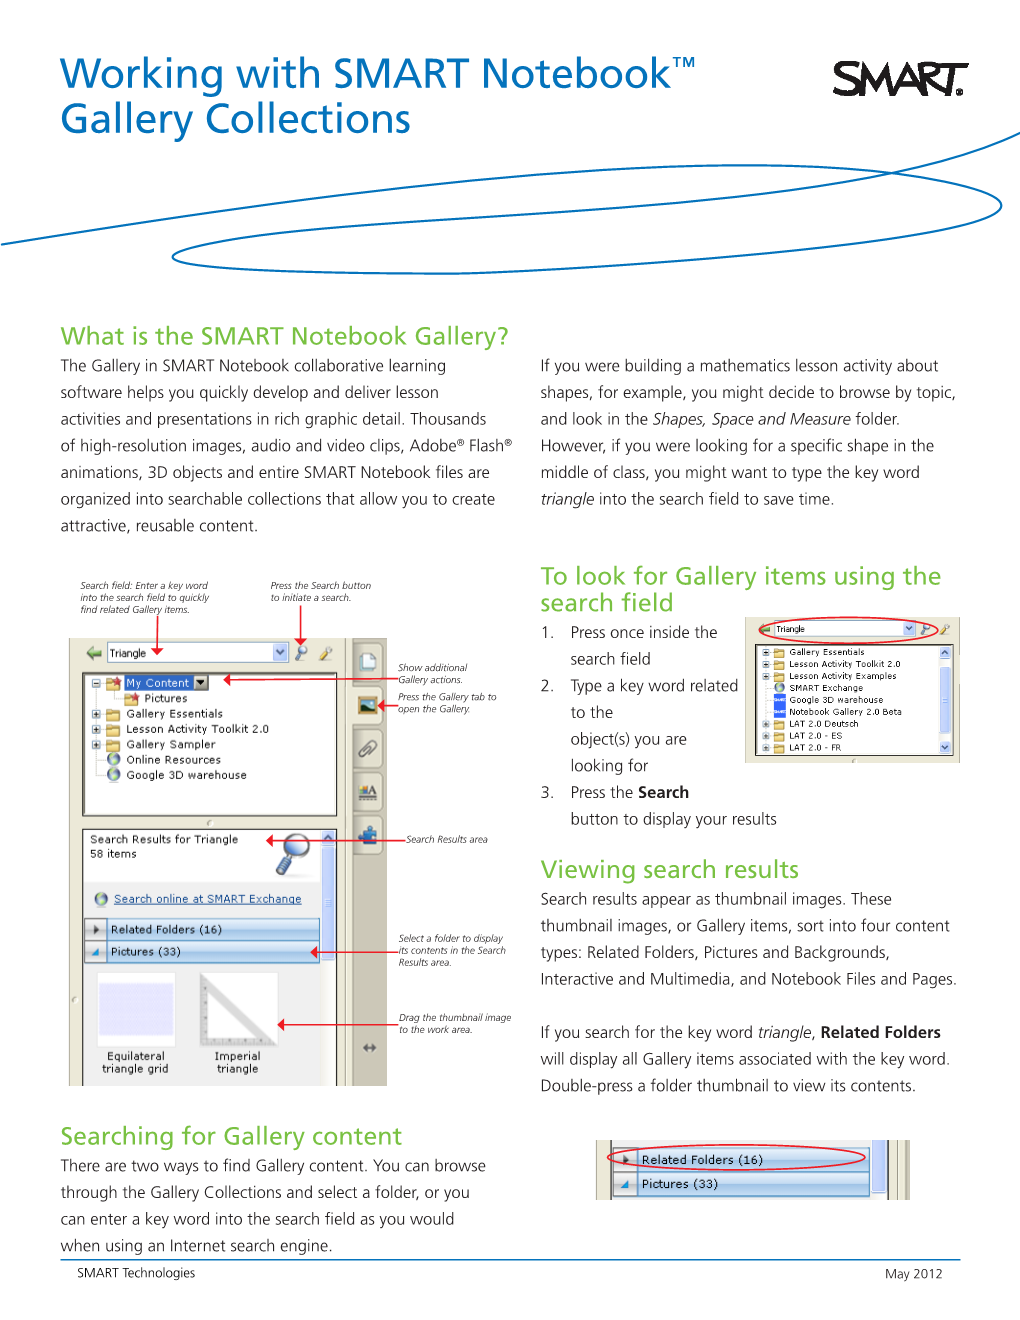 Working with SMART Notebook™ Gallery Collections